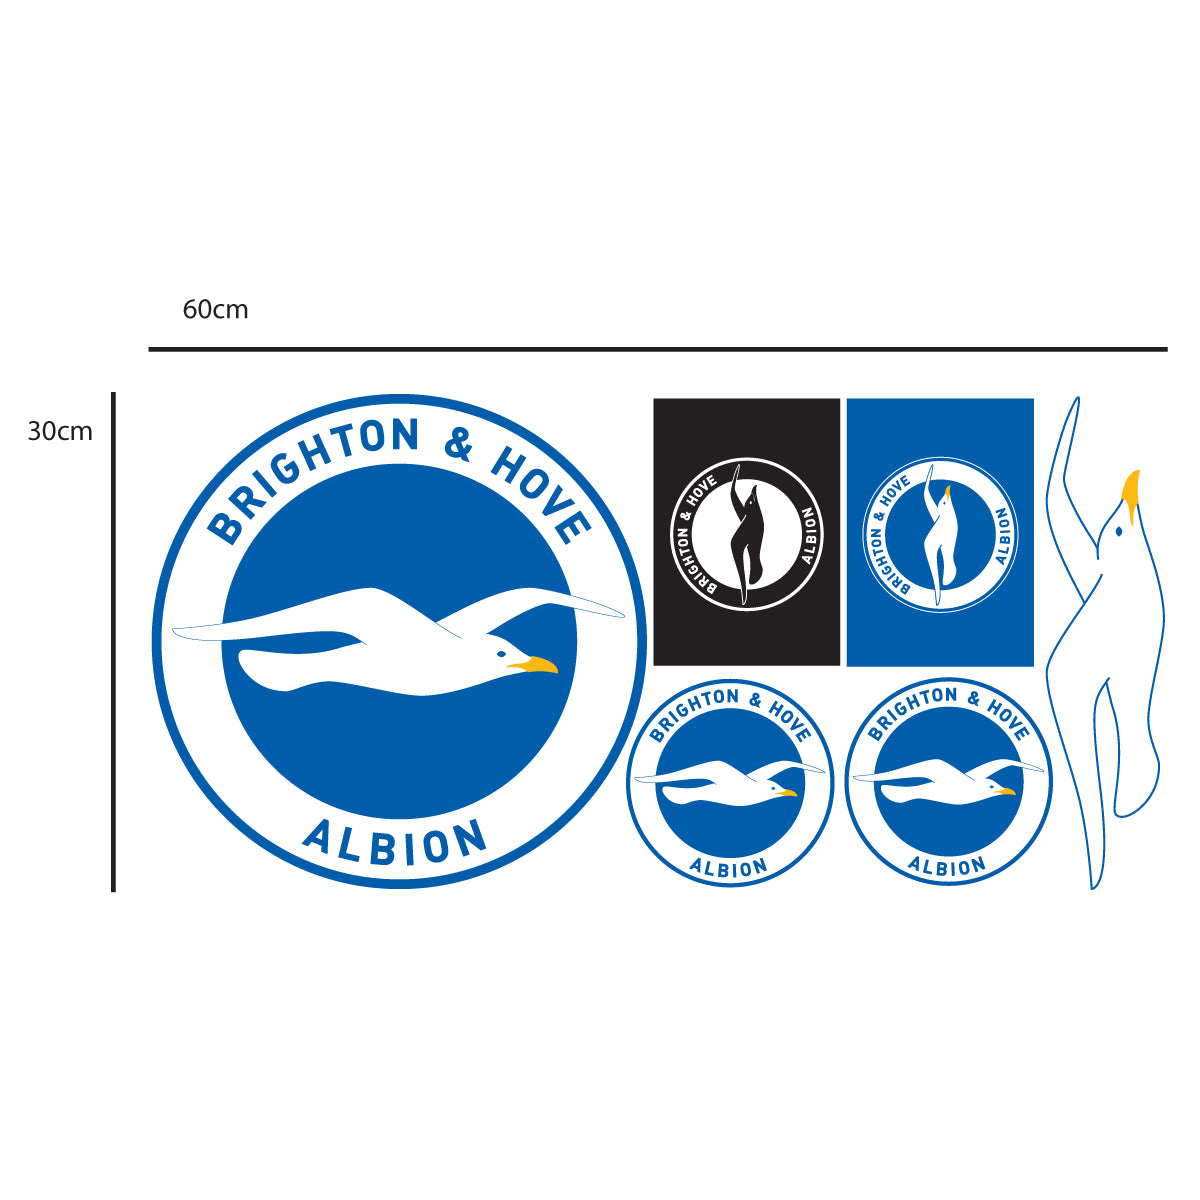 Brighton and Hove Albion FC Amex Stadium Night Time Smashed Wall Sticker